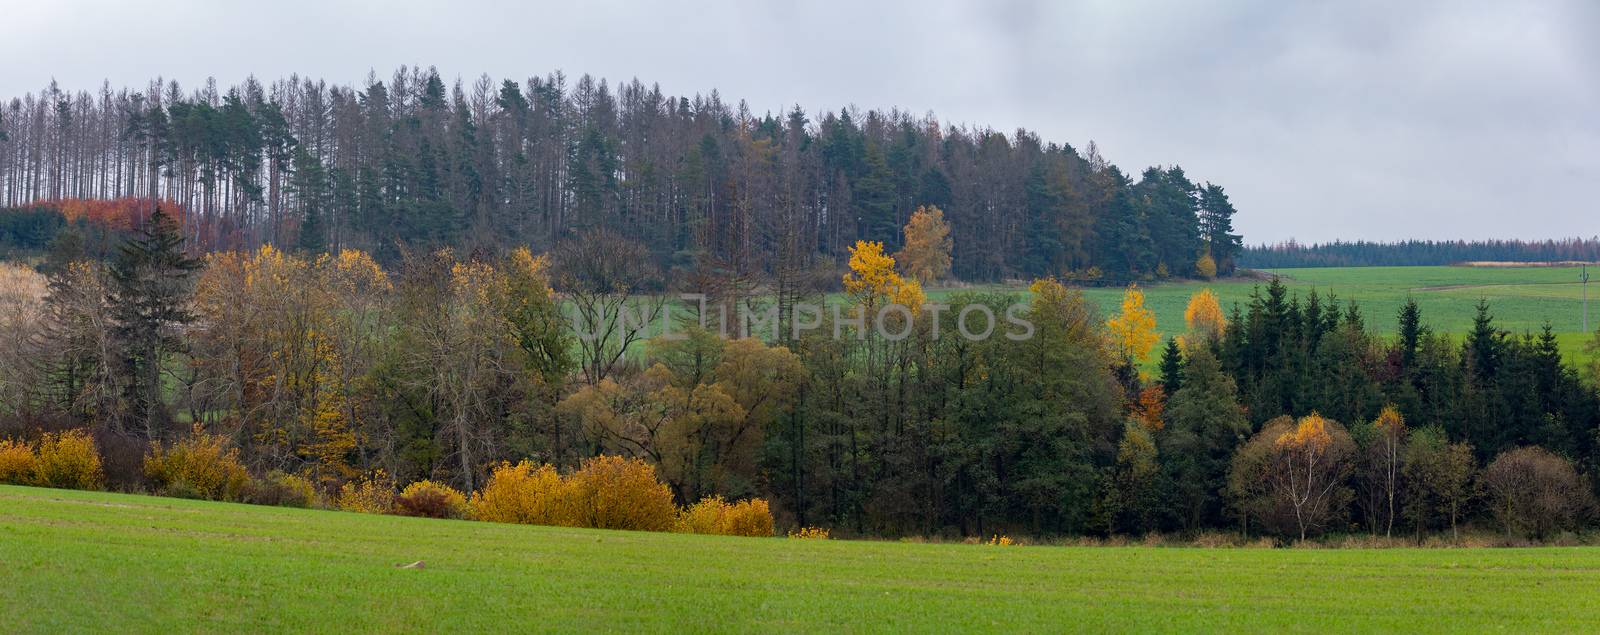 Autumn landscape color trees and meadow by artush